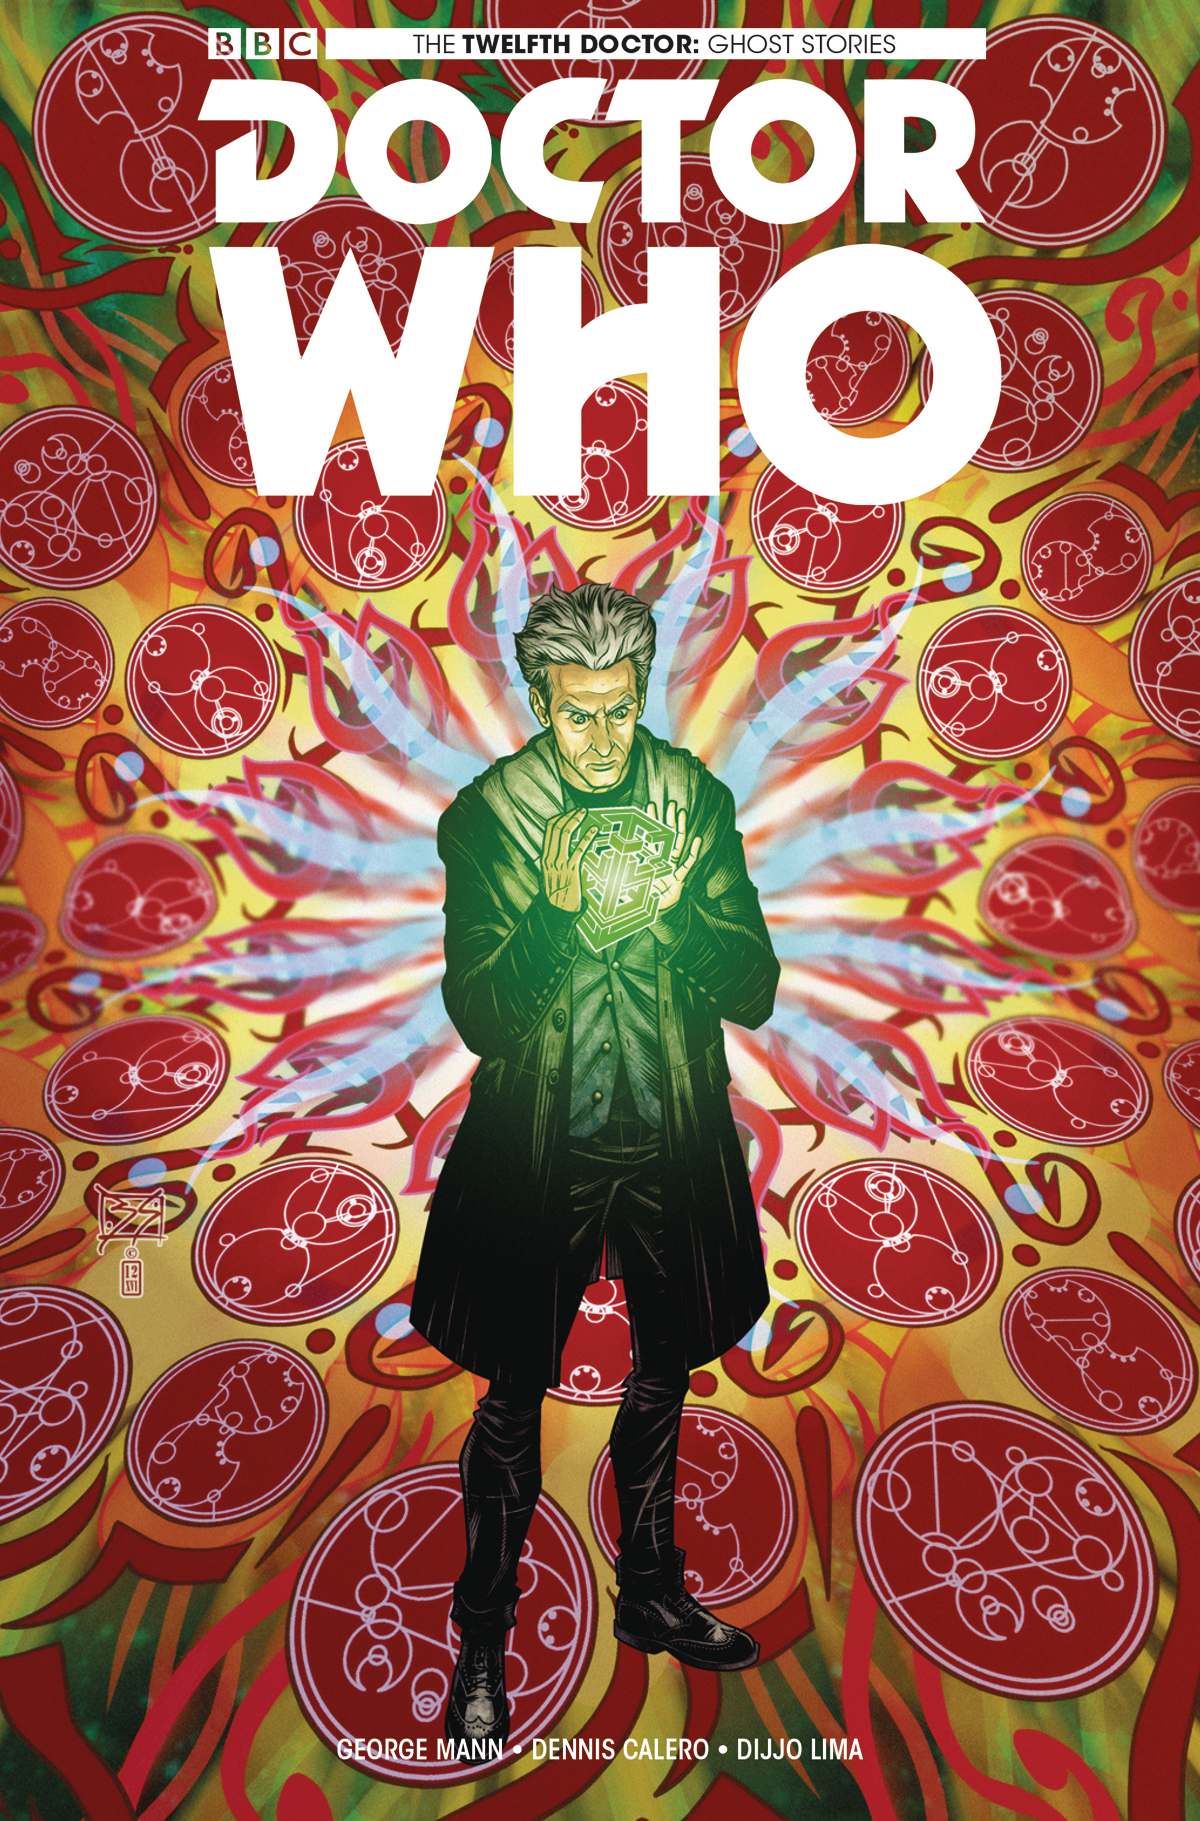 DOCTOR WHO GHOST STORIES #3 (OF 4) CVR A SHEDD